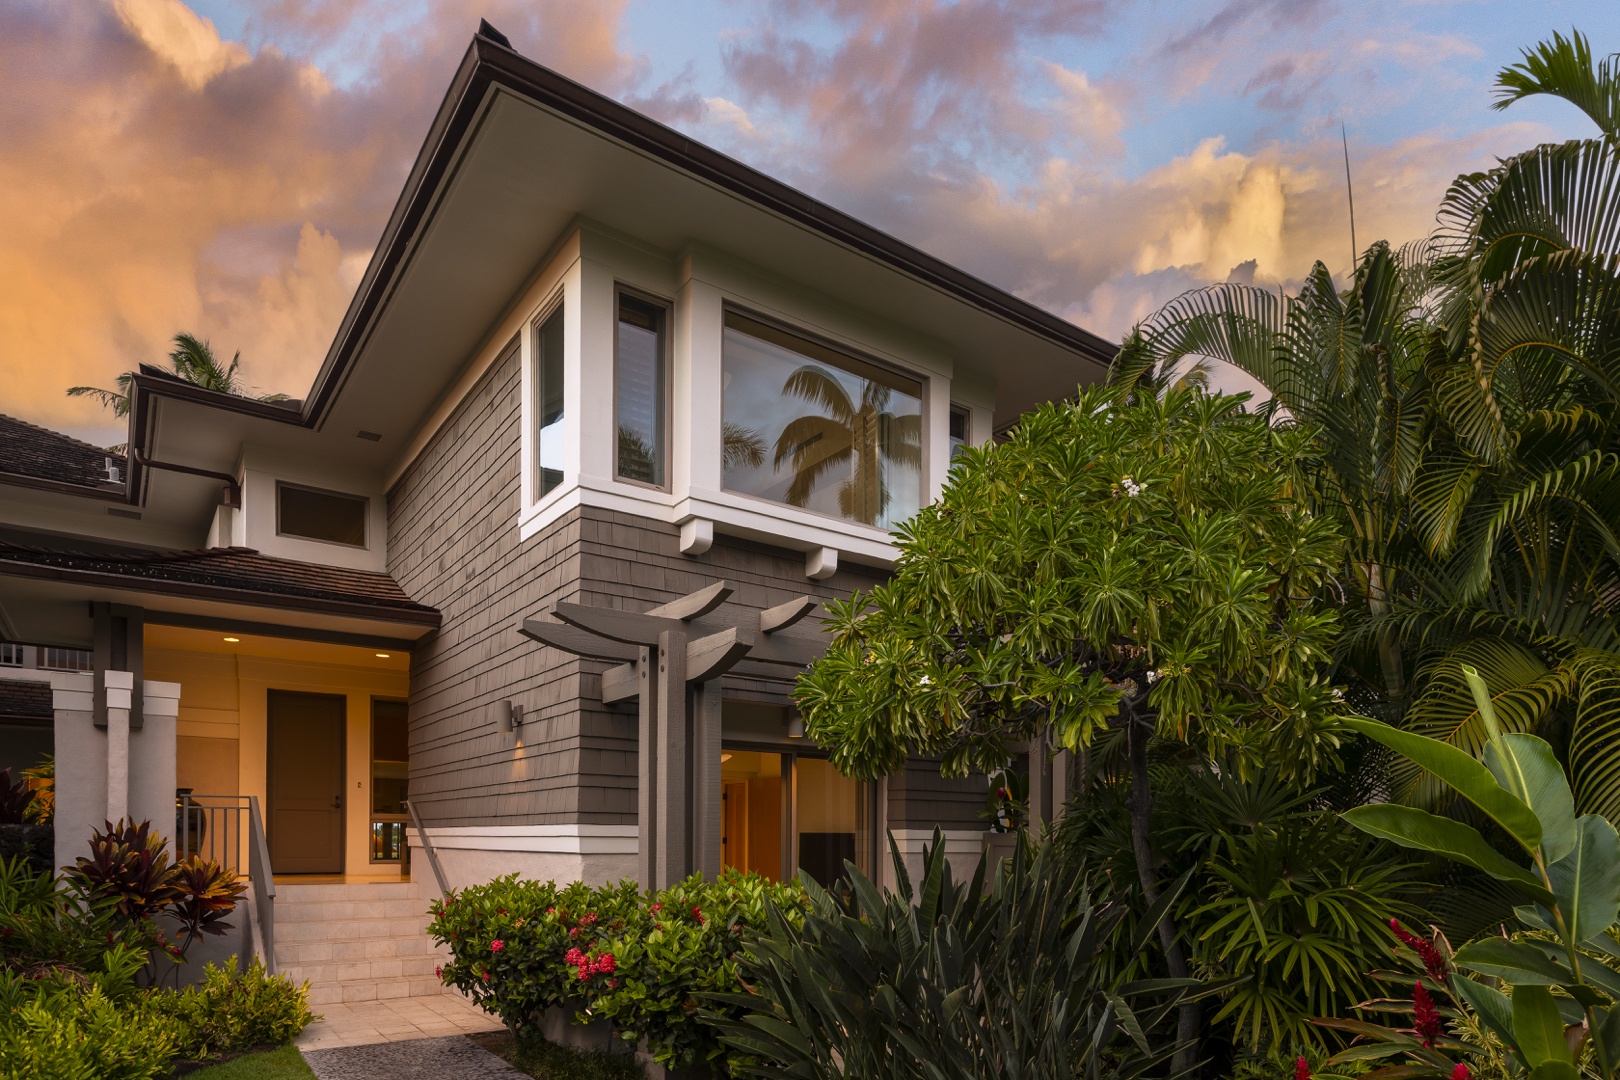 Kailua Kona Vacation Rentals, 3BD Palm Villa (130B) at Four Seasons Resort at Hualalai - Approach the entrance of the villa to find alluring colors peaking over the leaves